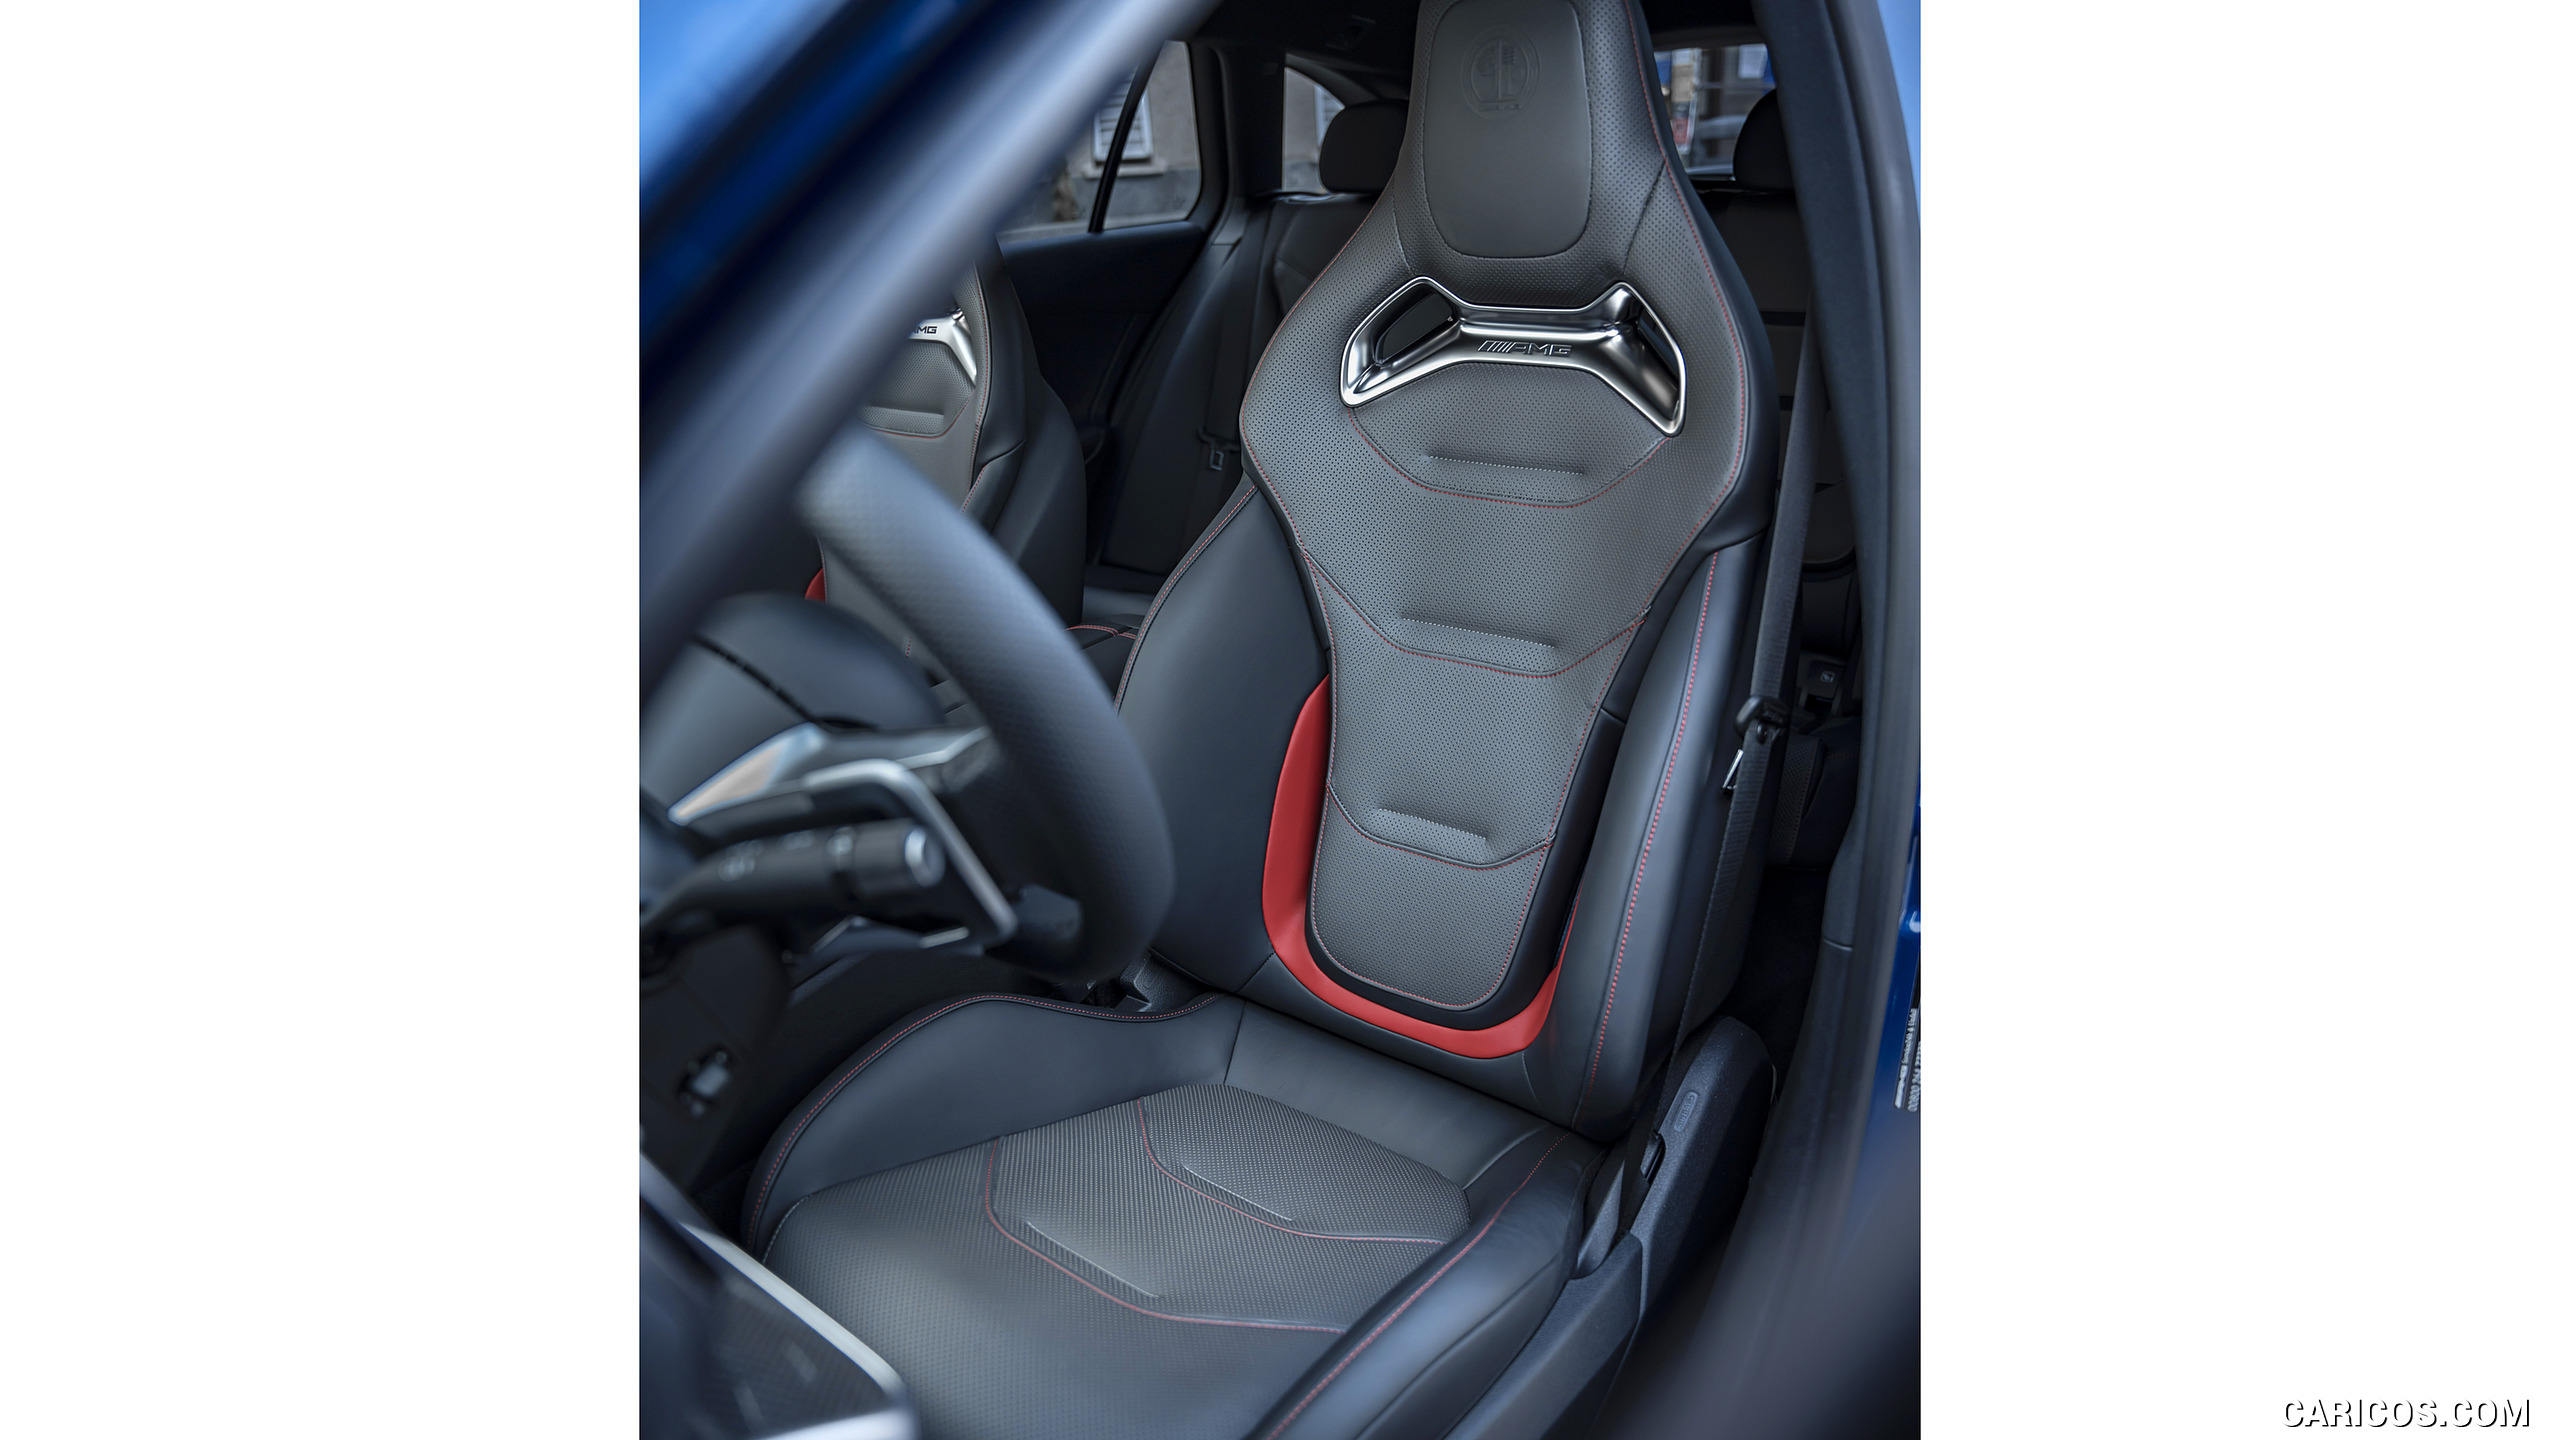 2023 Mercedes-AMG C 63 S E Performance Estate - Interior, Front Seats, #78 of 81